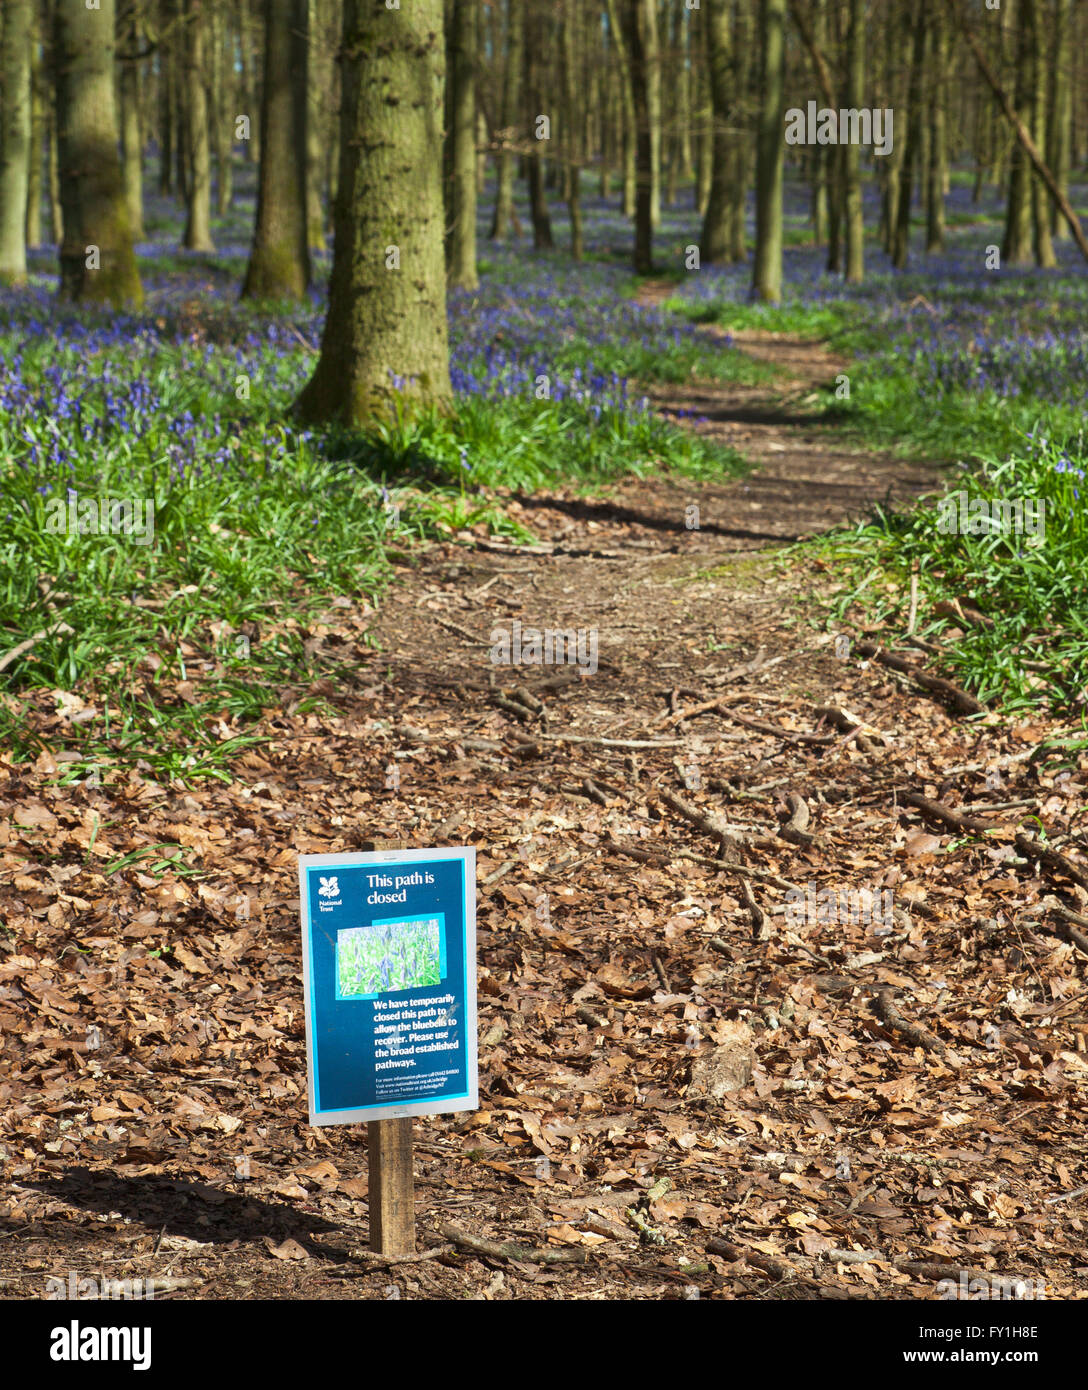 Dockey Wood, Ashridge Estate, Berkhamsted, Hertfordshire, England, UK. 20th April 2016. Due to problems with the bluebells getting trampled, the National Trust has closed some of the paths and are charging a fee of £3 to see this years display. © Tony Wat Stock Photo